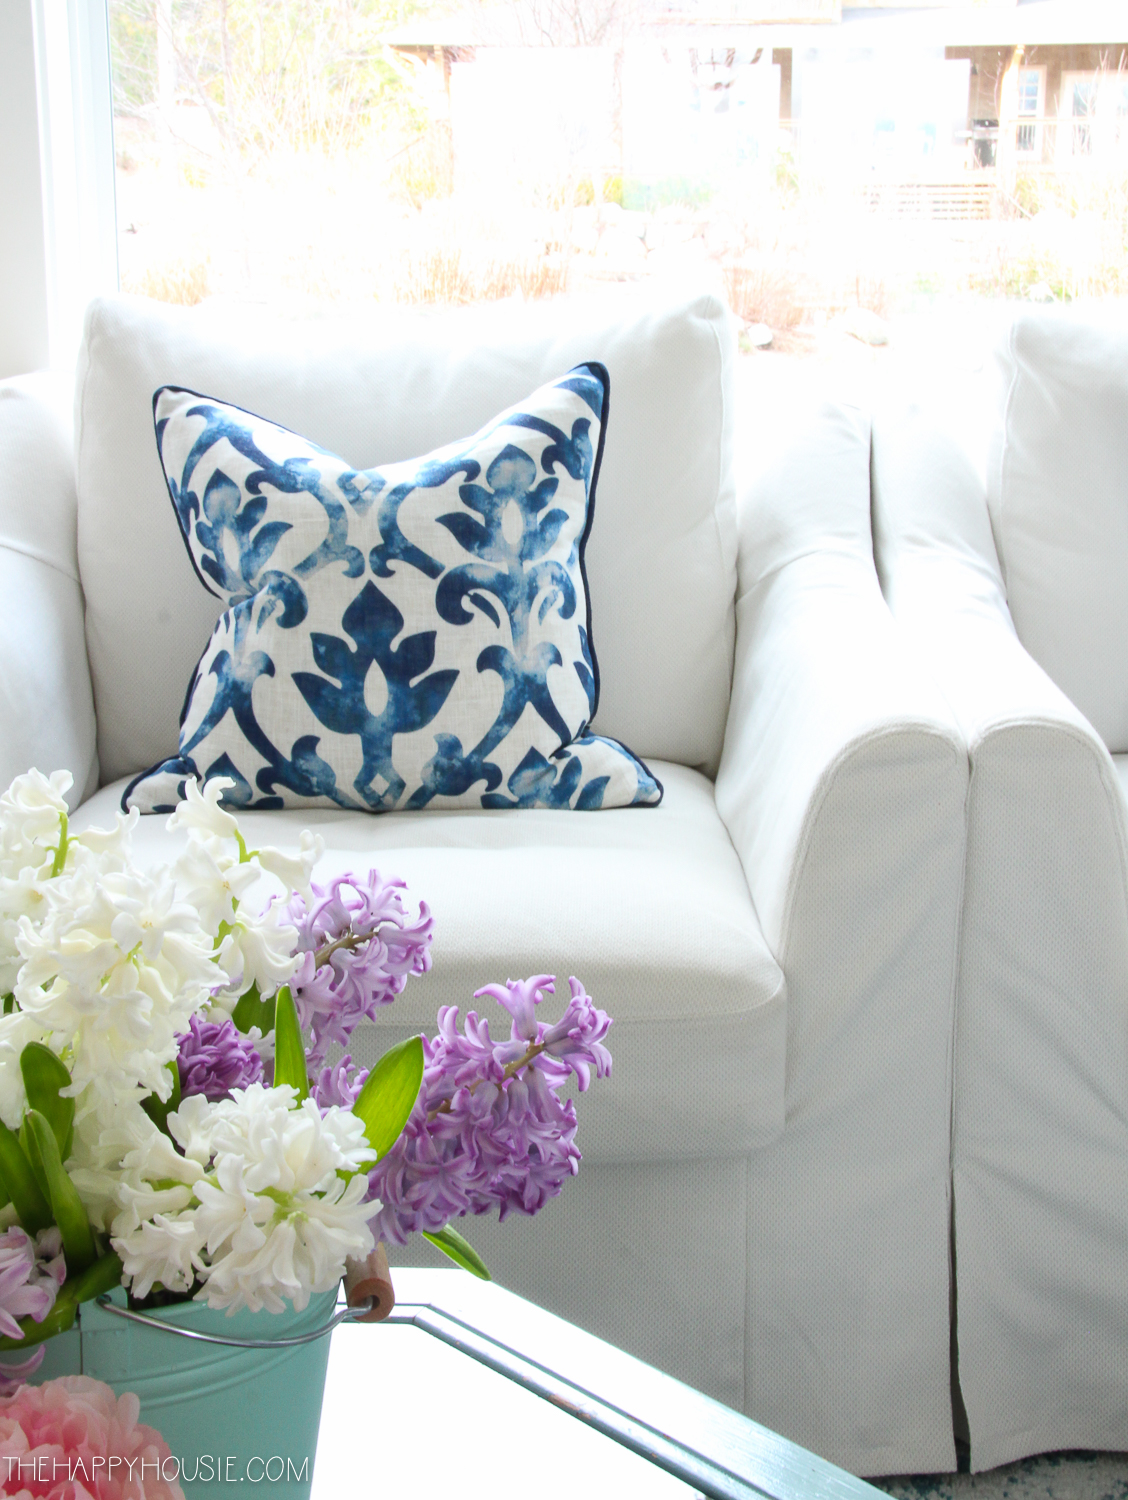 A blue pillow is on the white chair.